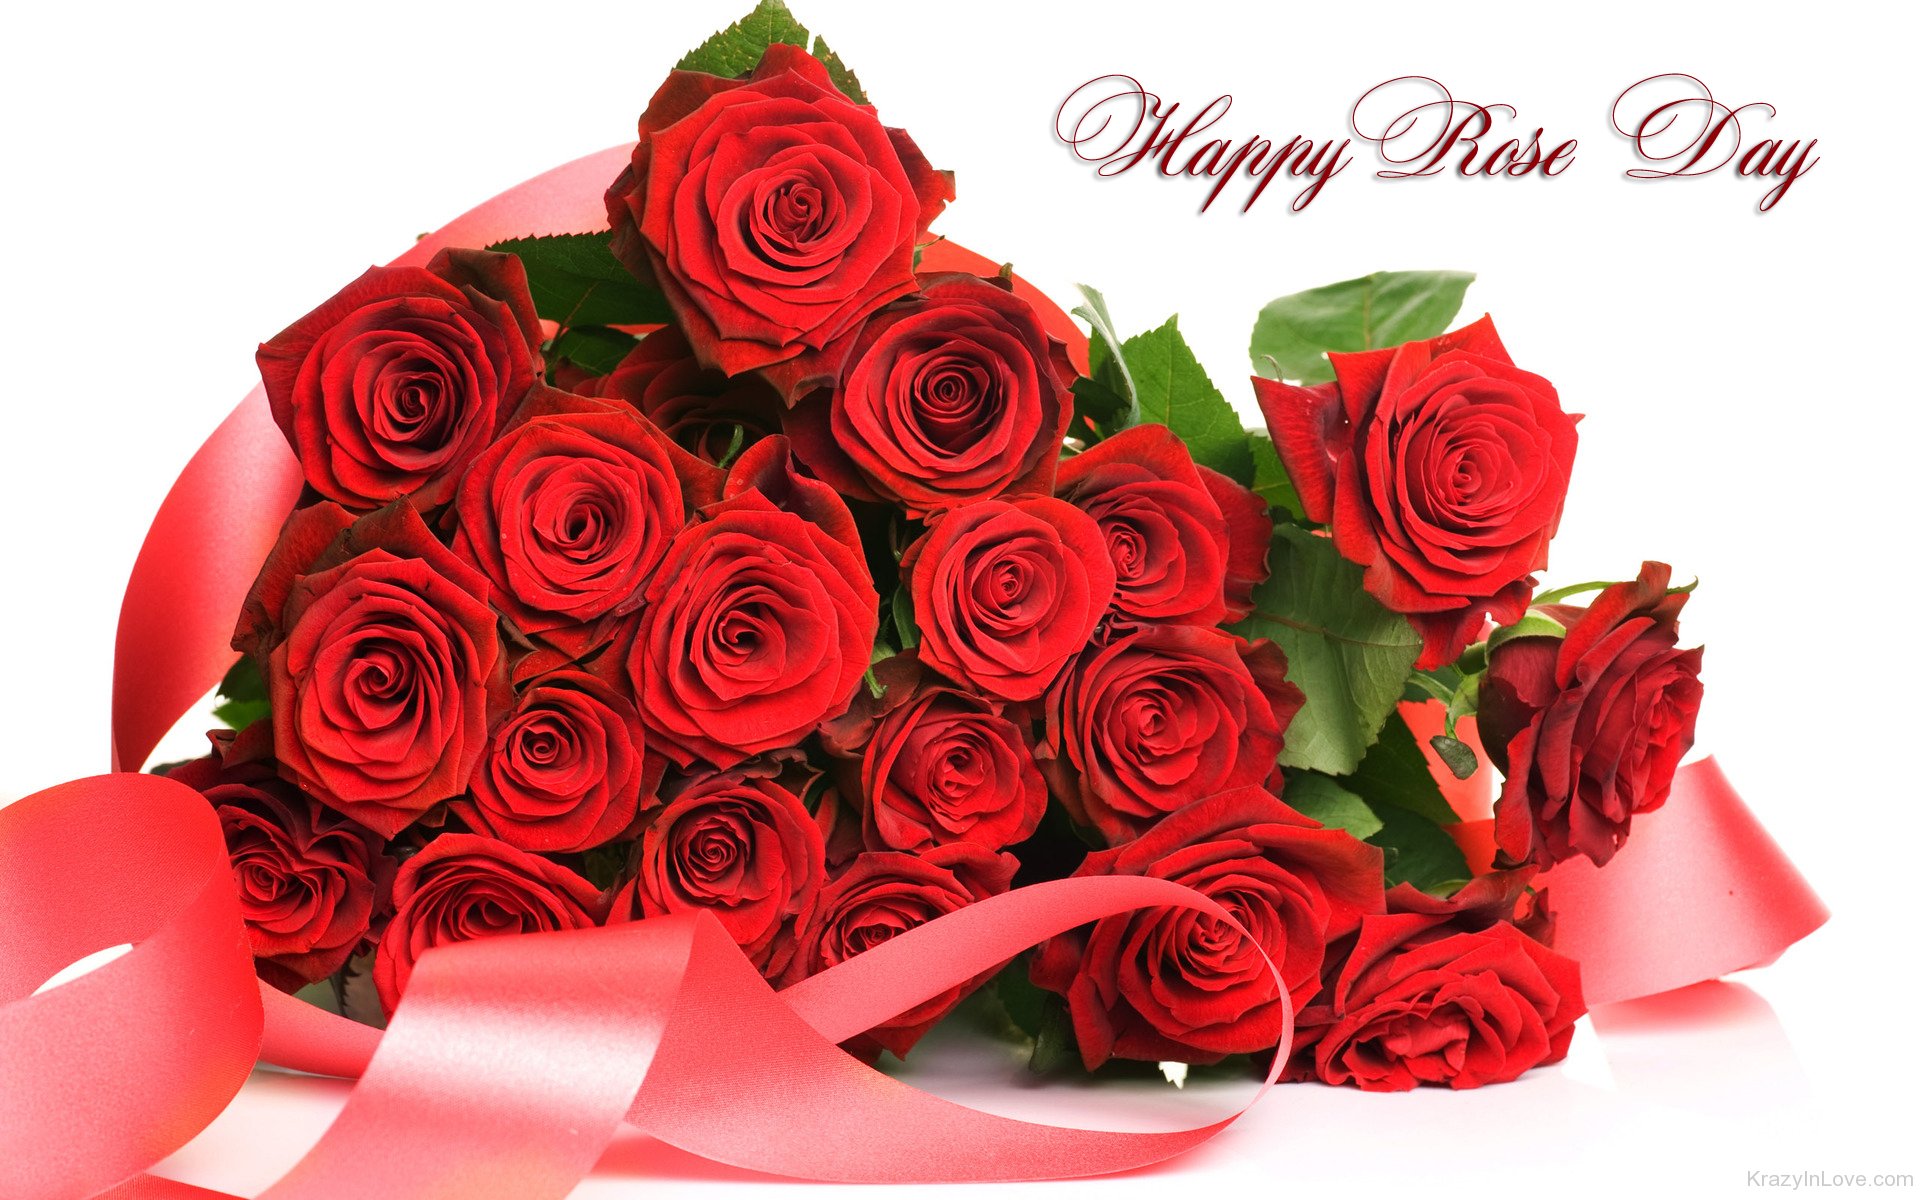 BEAUTIFUL ROSE DAY 2016 QUOTES MESSAGES IN ENGLISH. WITH IMAGES – Romantic  Shayaris